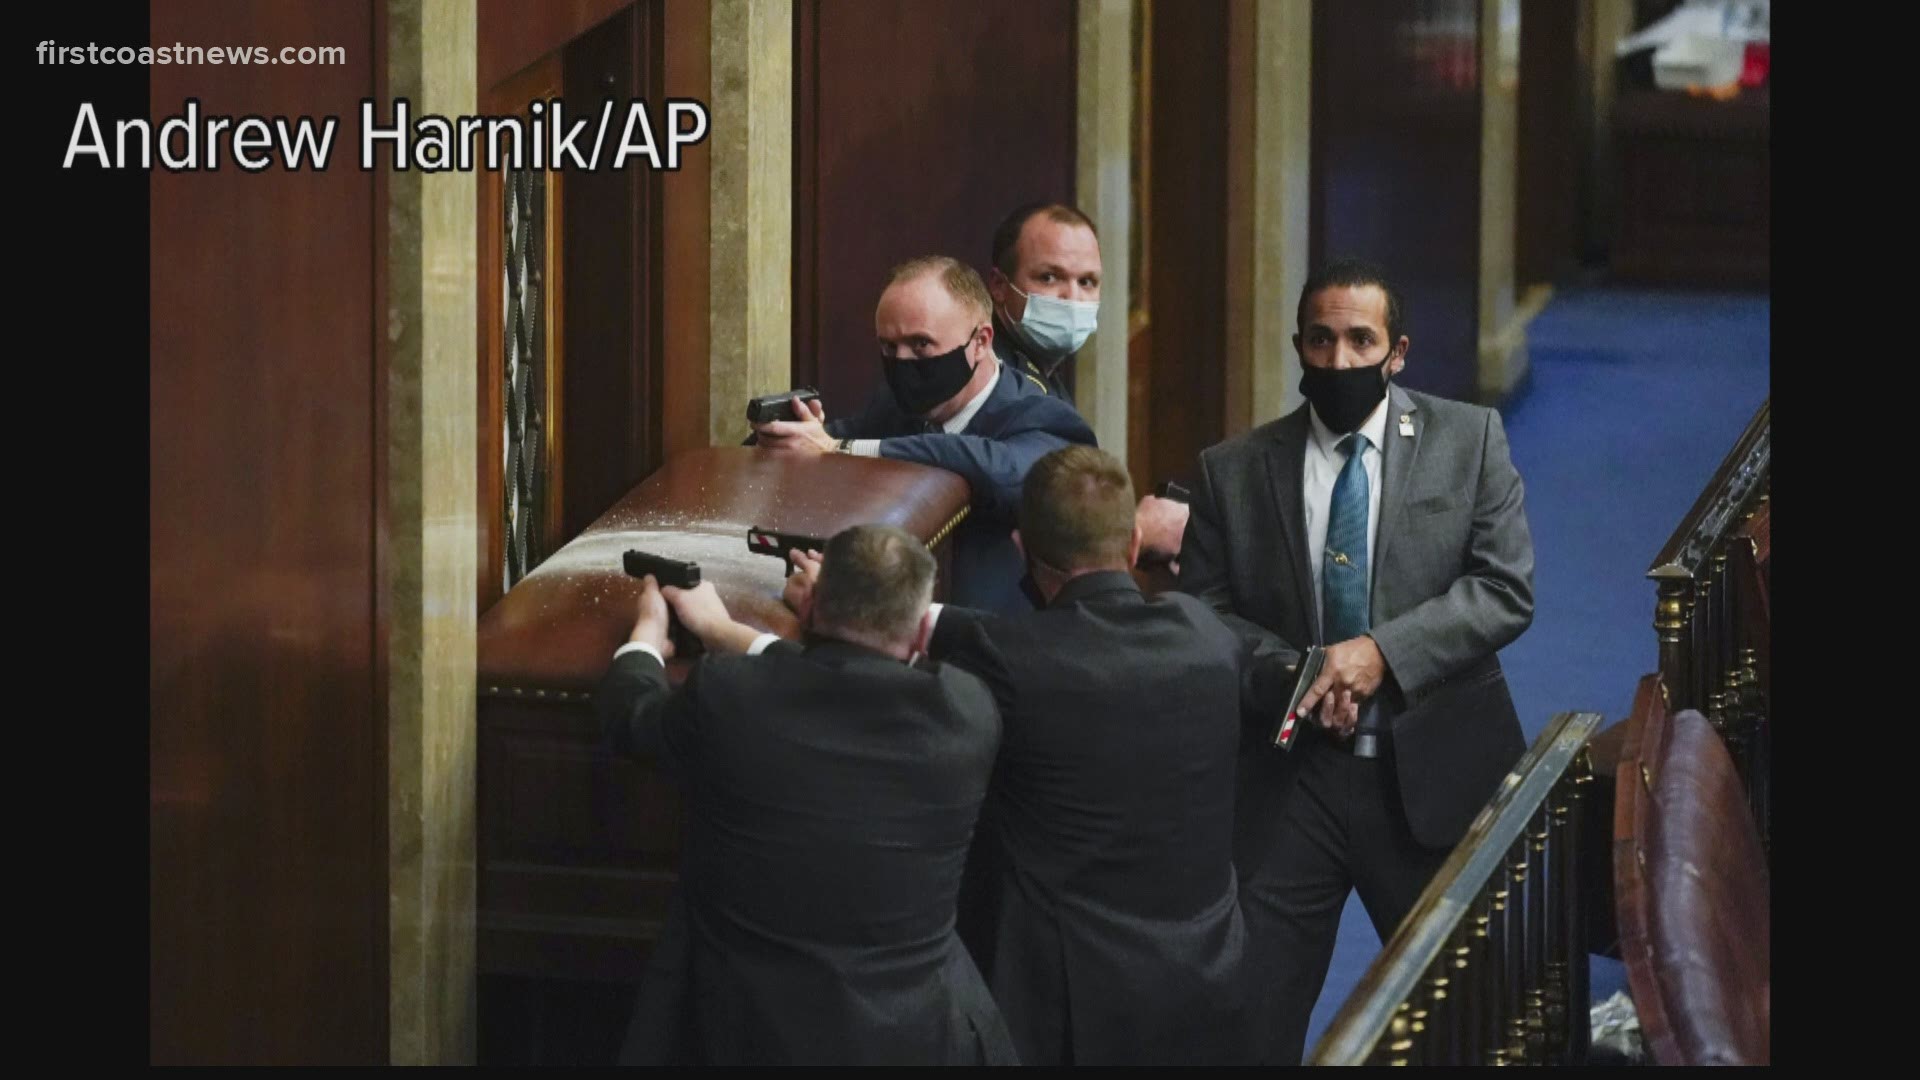 Harnik was in an side room working when he got a call from his office to maybe grab some shots of people coming up the steps into the Capitol.